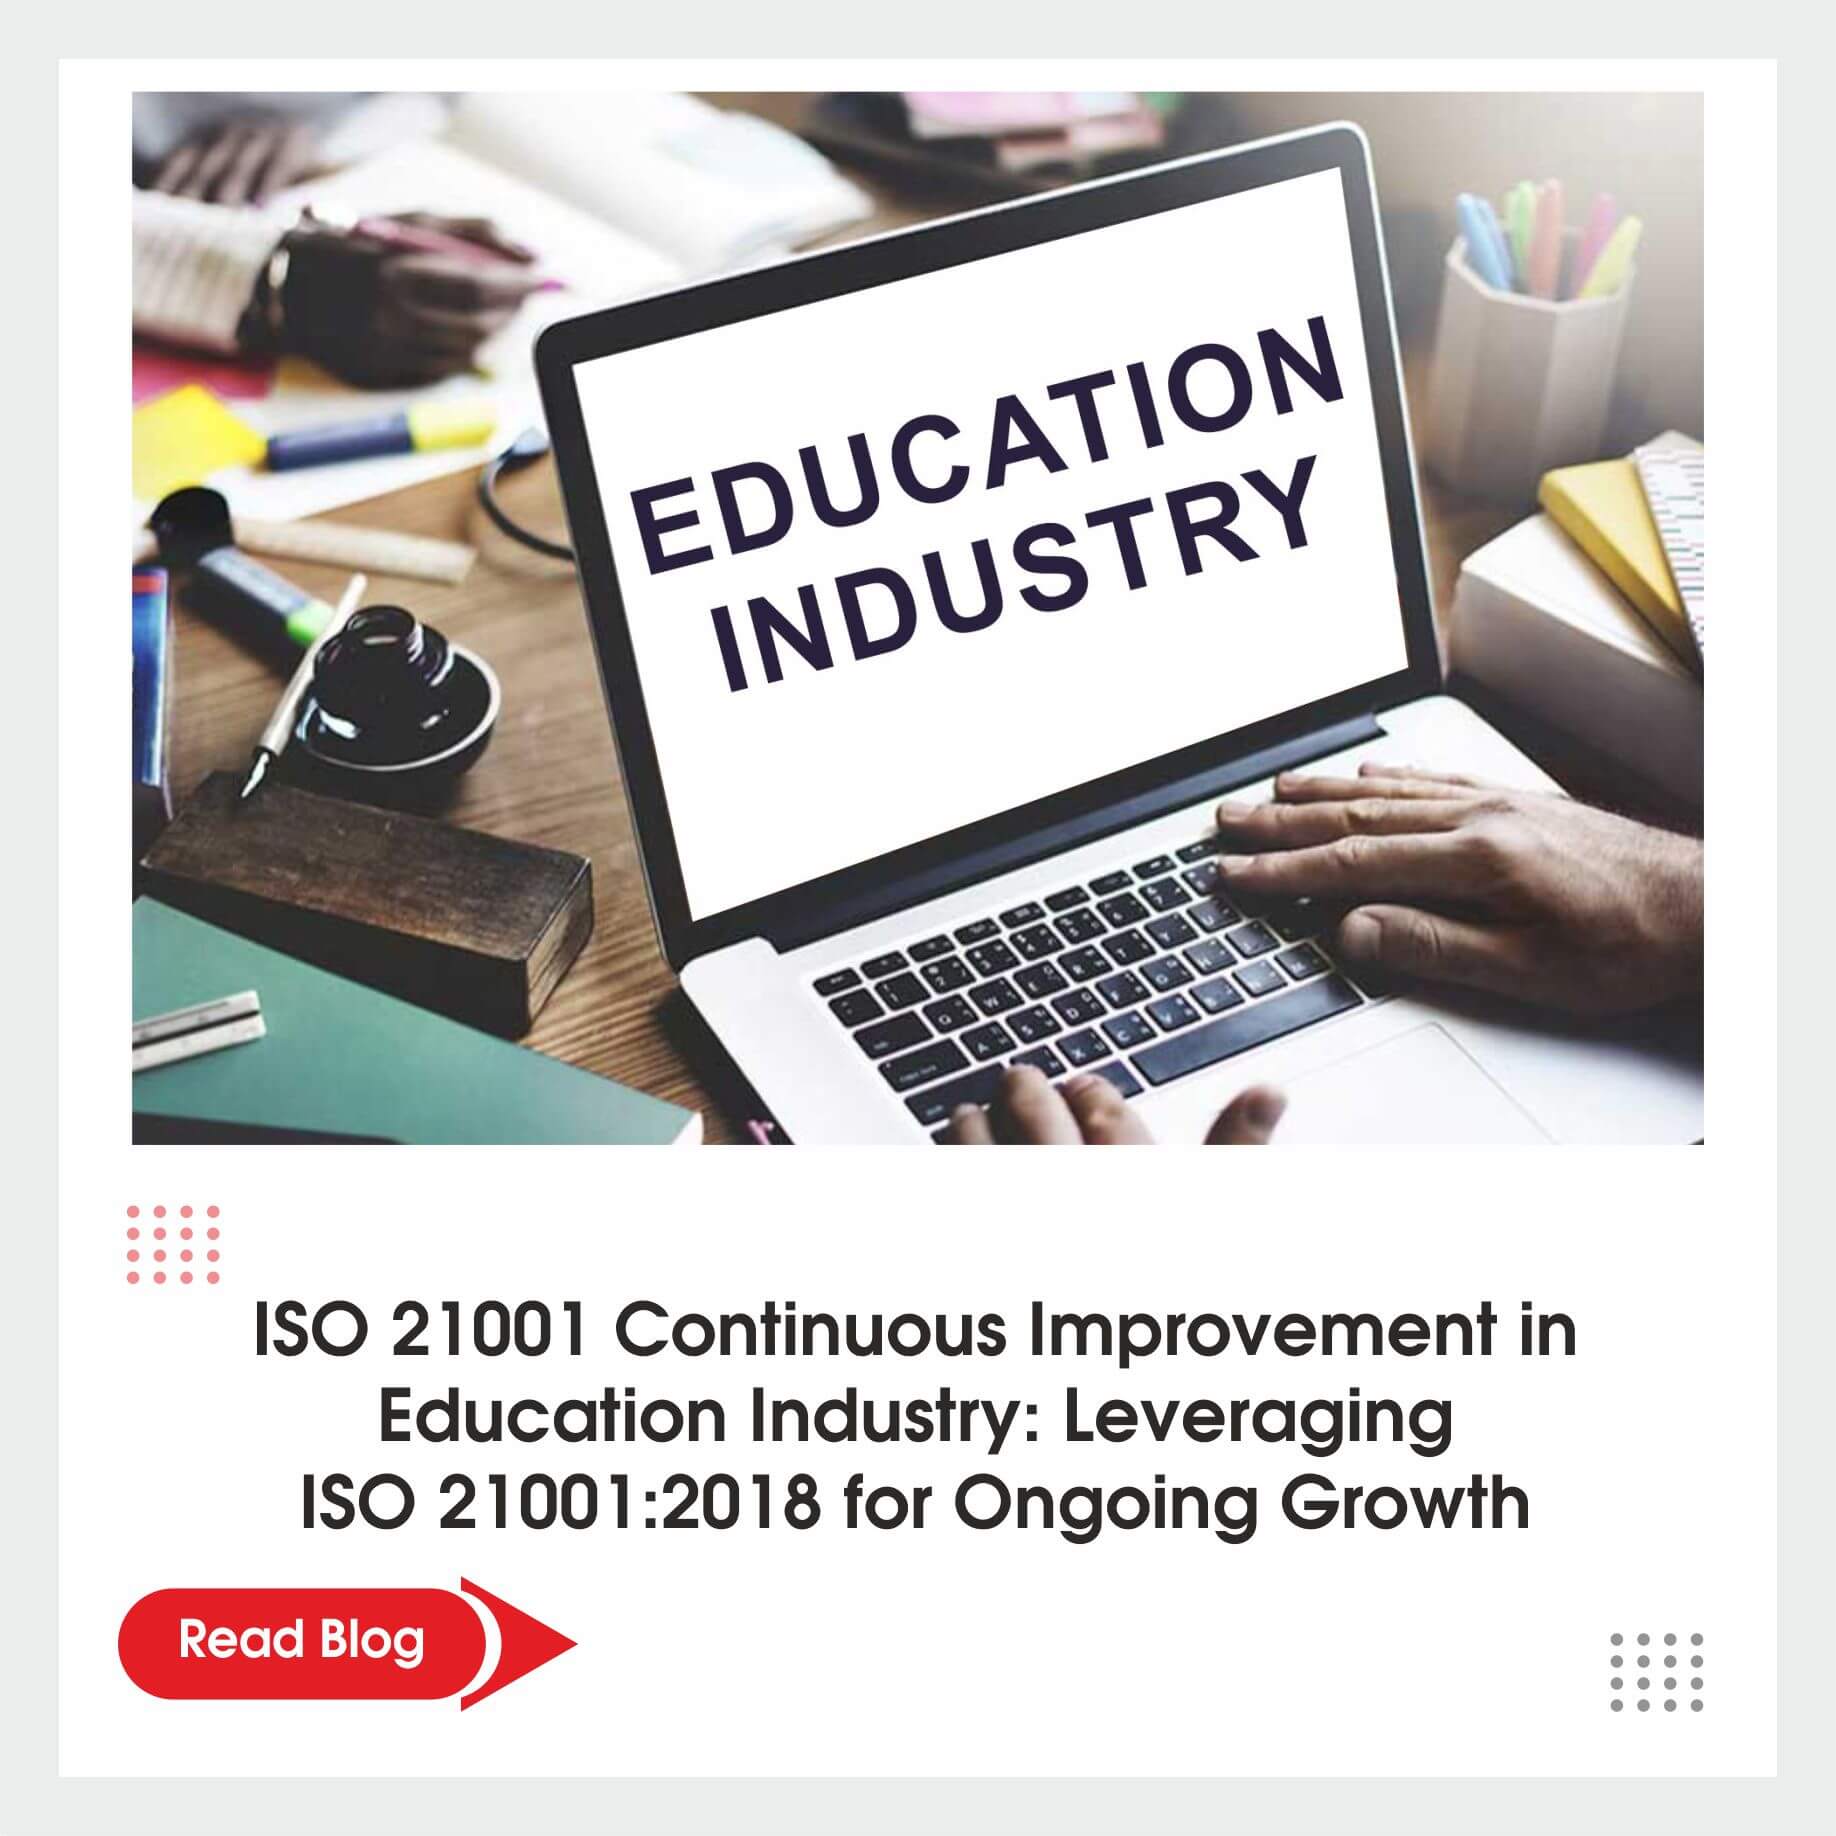 ISO 21001 Continuous Improvement in Education Industry: Leveraging ISO 21001:2018 for Ongoing Growth